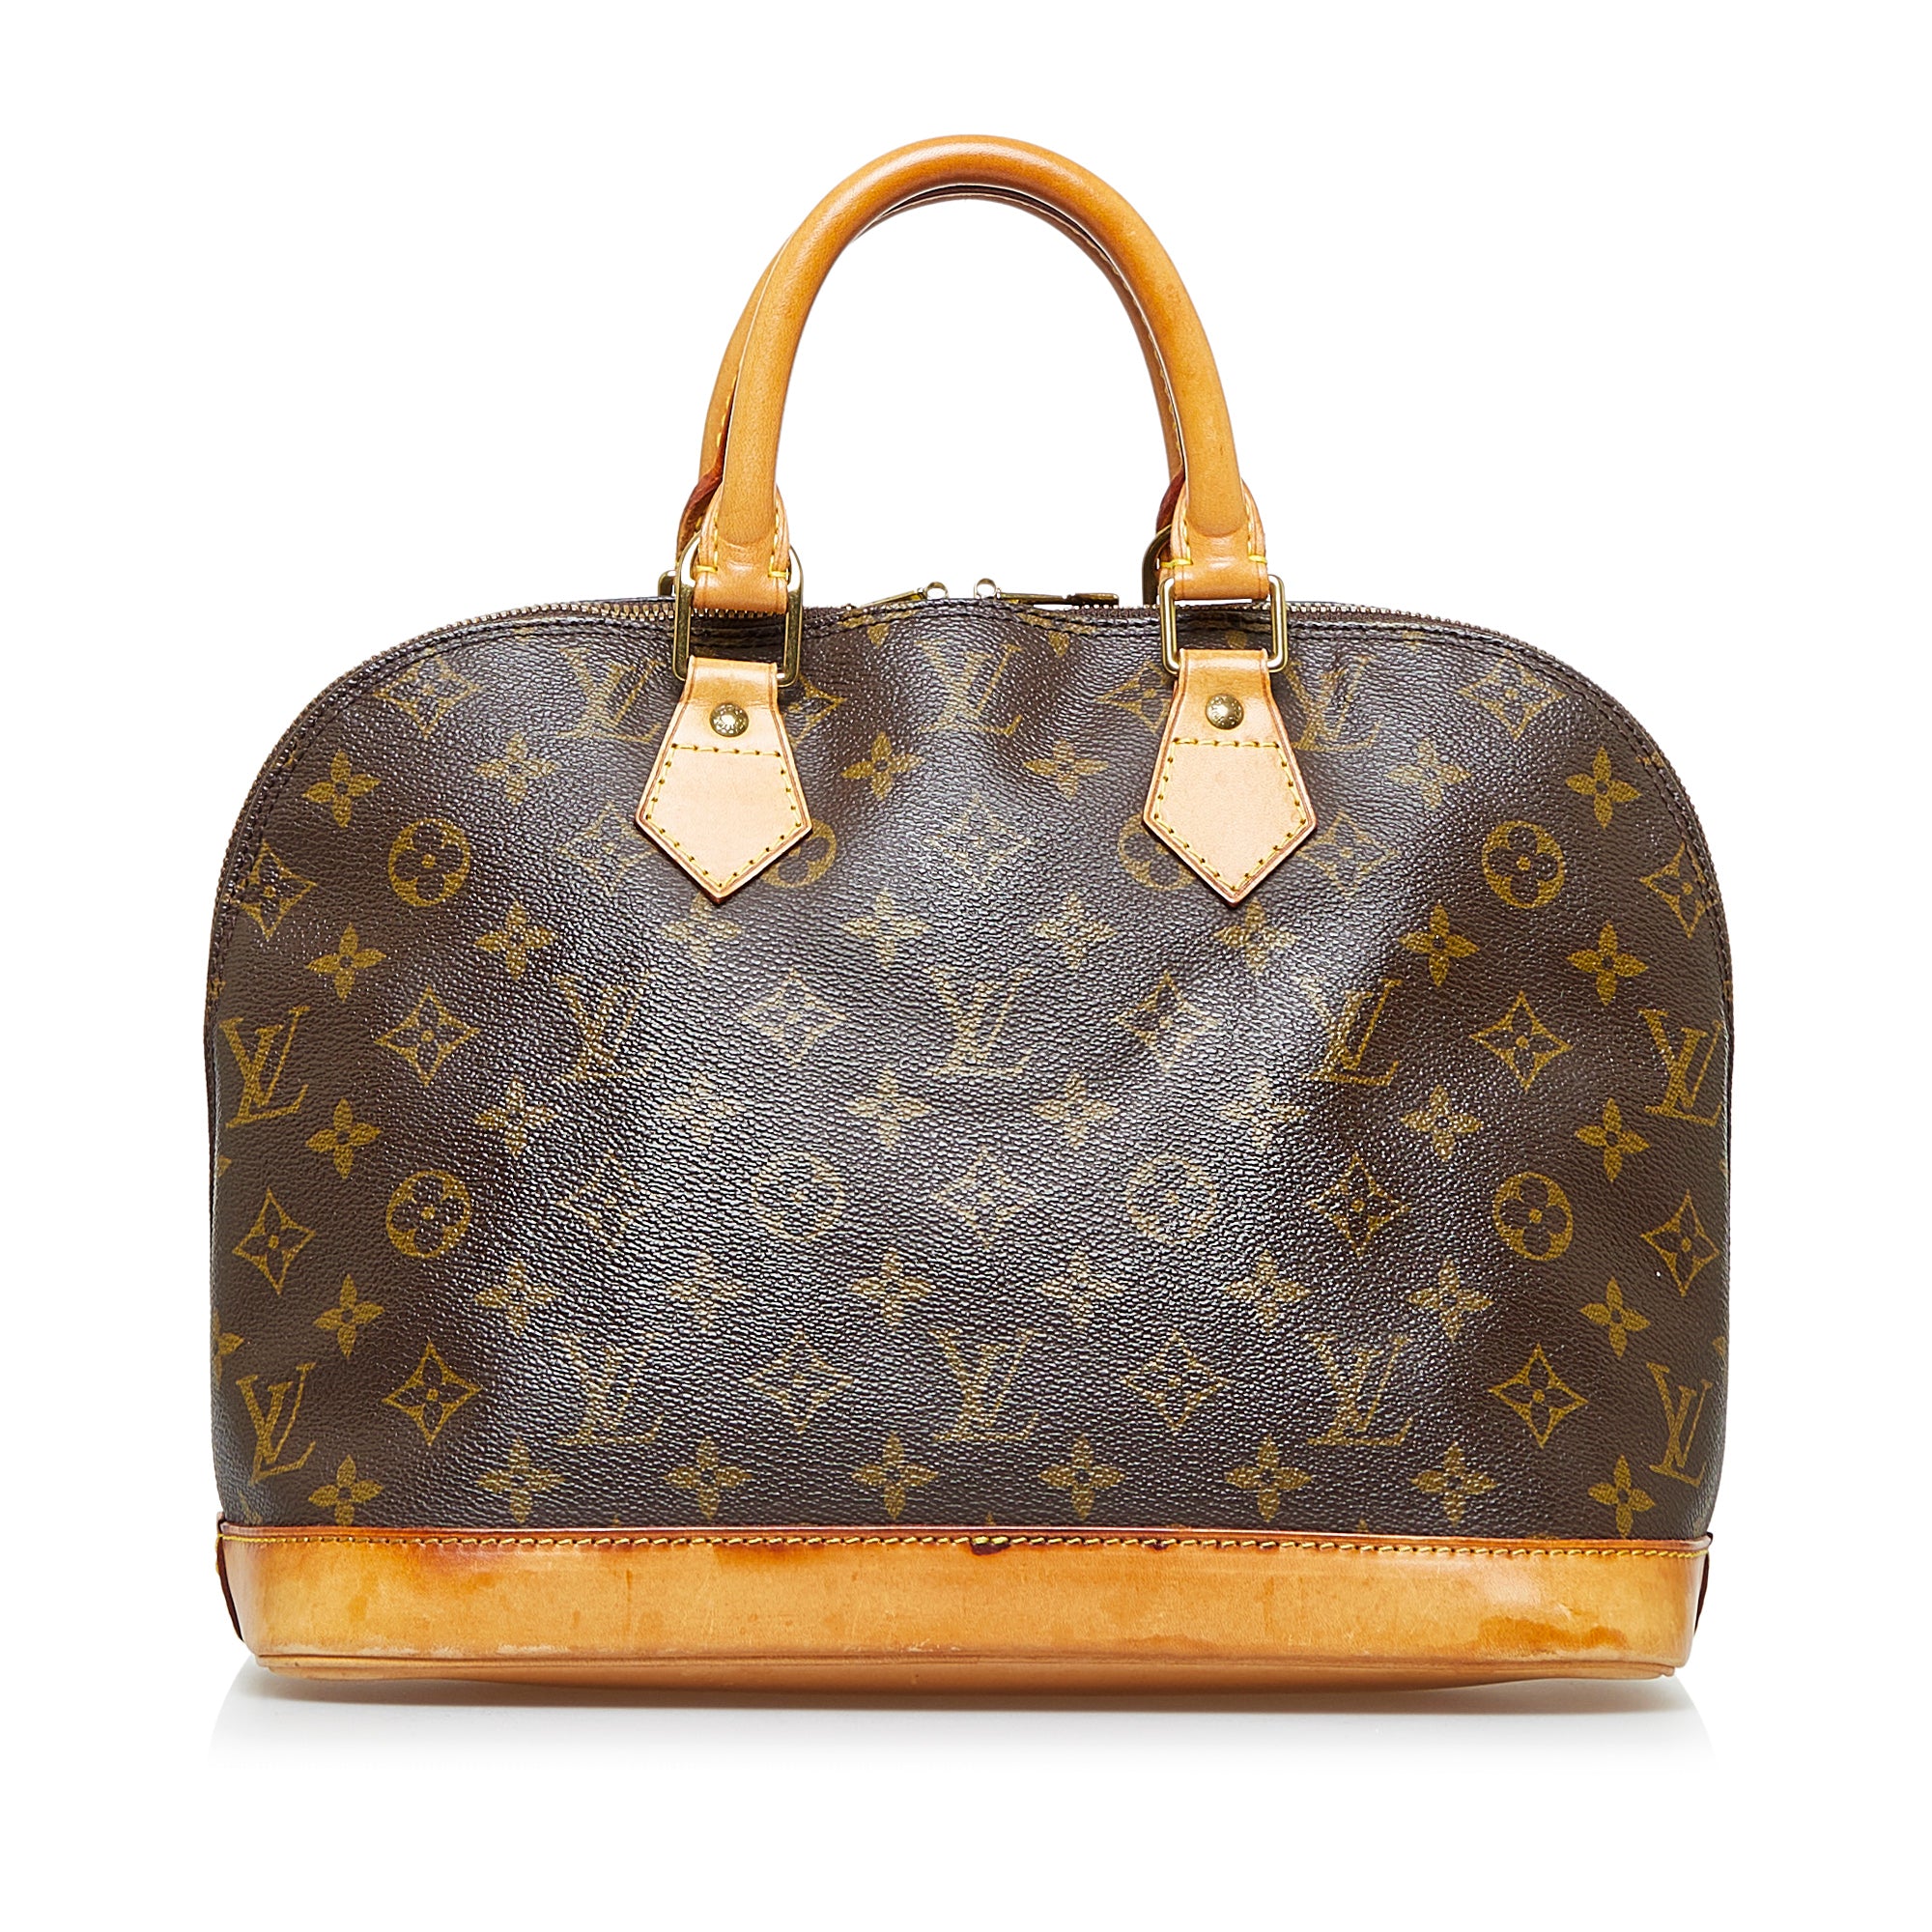 Classy and Elegant Authentic Louis Vuitton Monogram Bucket PM Handbag -  clothing & accessories - by owner - apparel